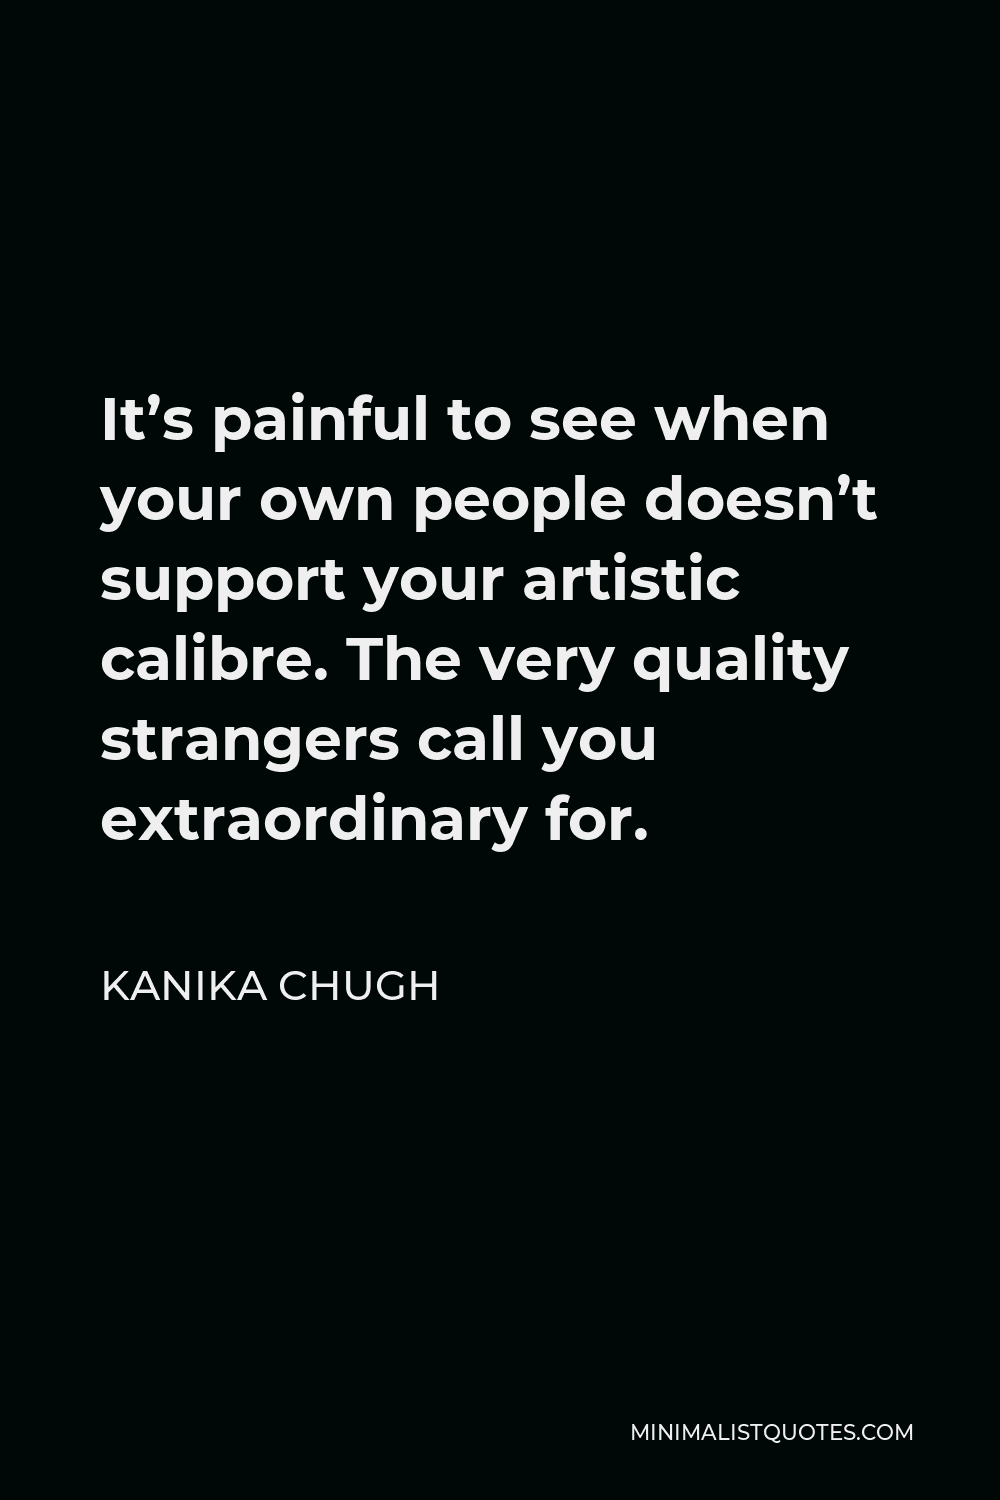 Kanika Chugh Quote - It’s painful to see when your own people doesn’t support your artistic calibre. The very quality strangers call you extraordinary for.